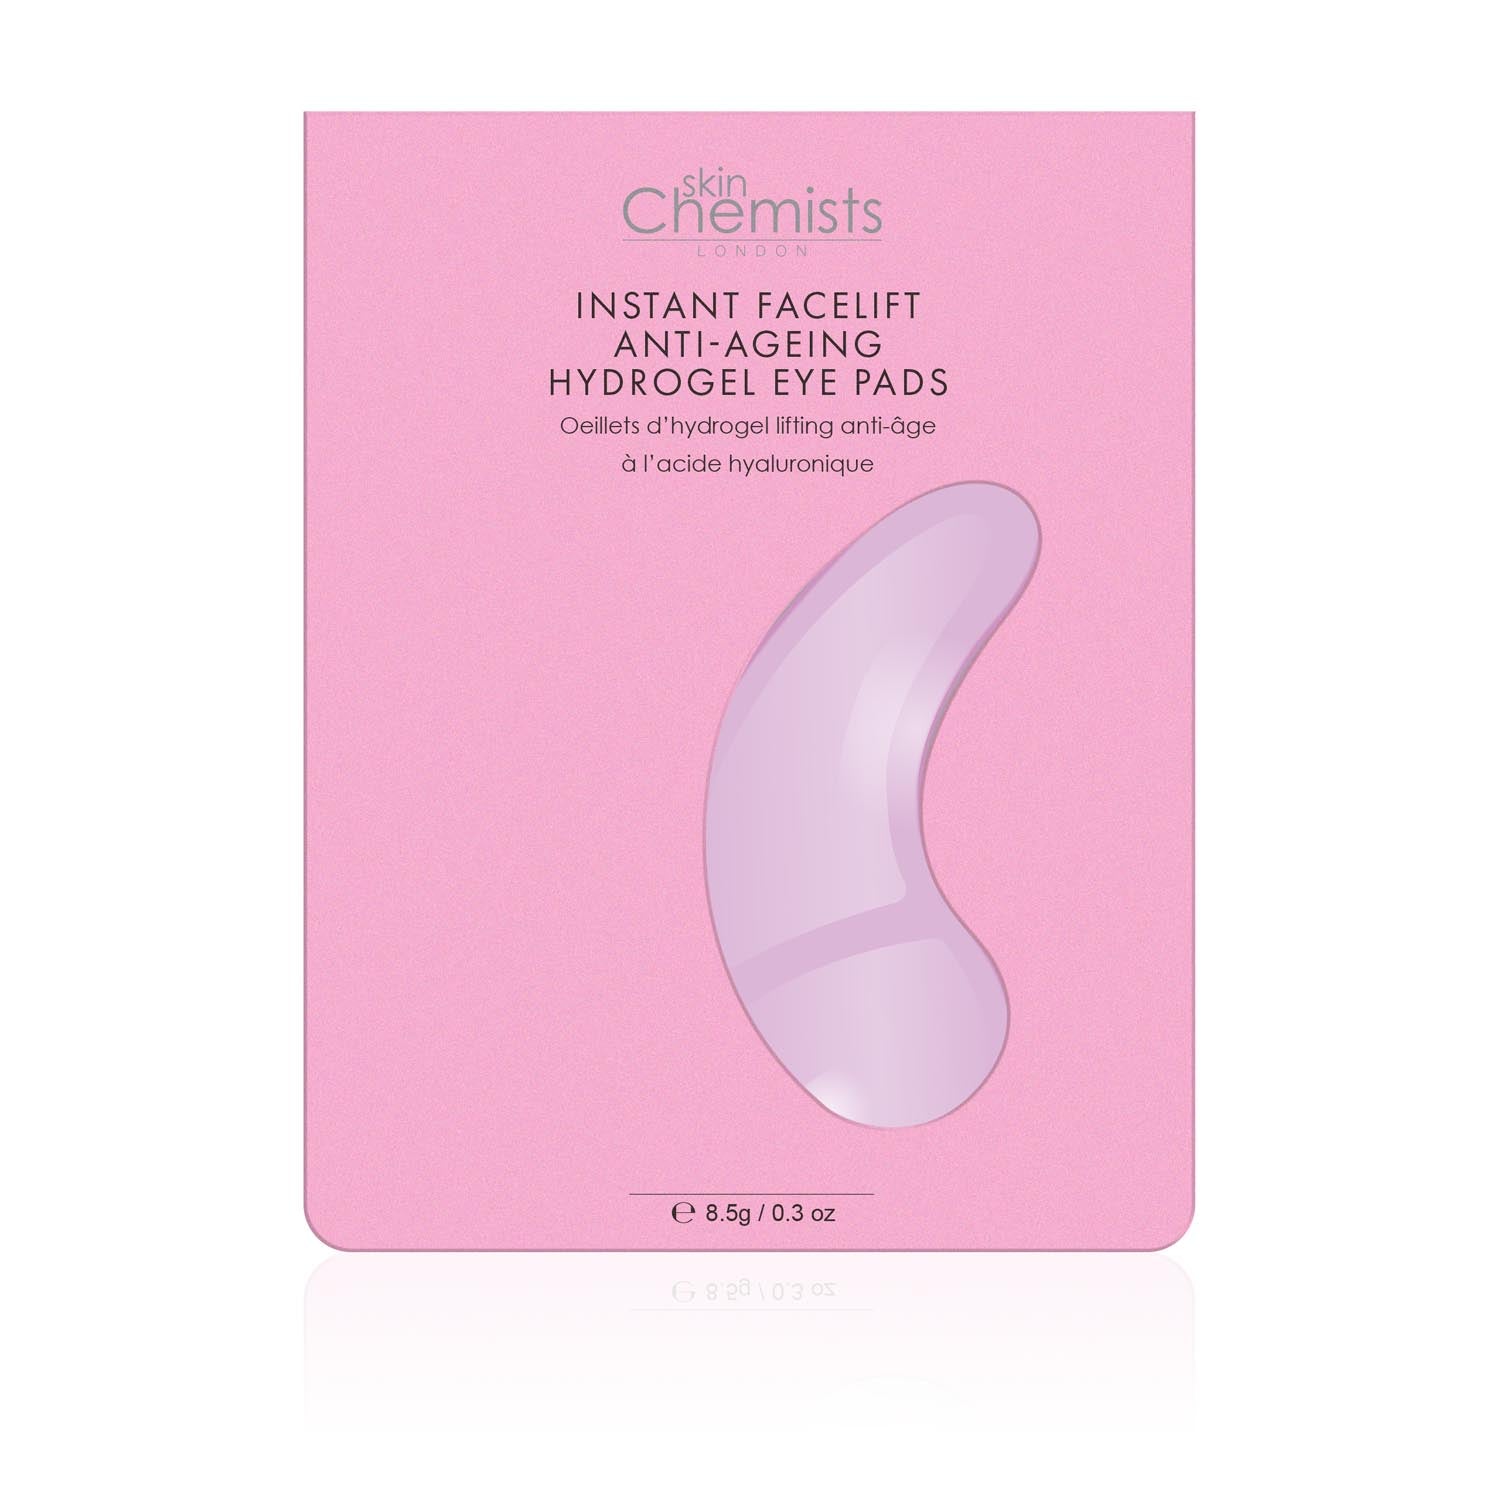 SkinChemists Instant Facelift Anti-Age Hydrogel Eye Pads (1 x 2)